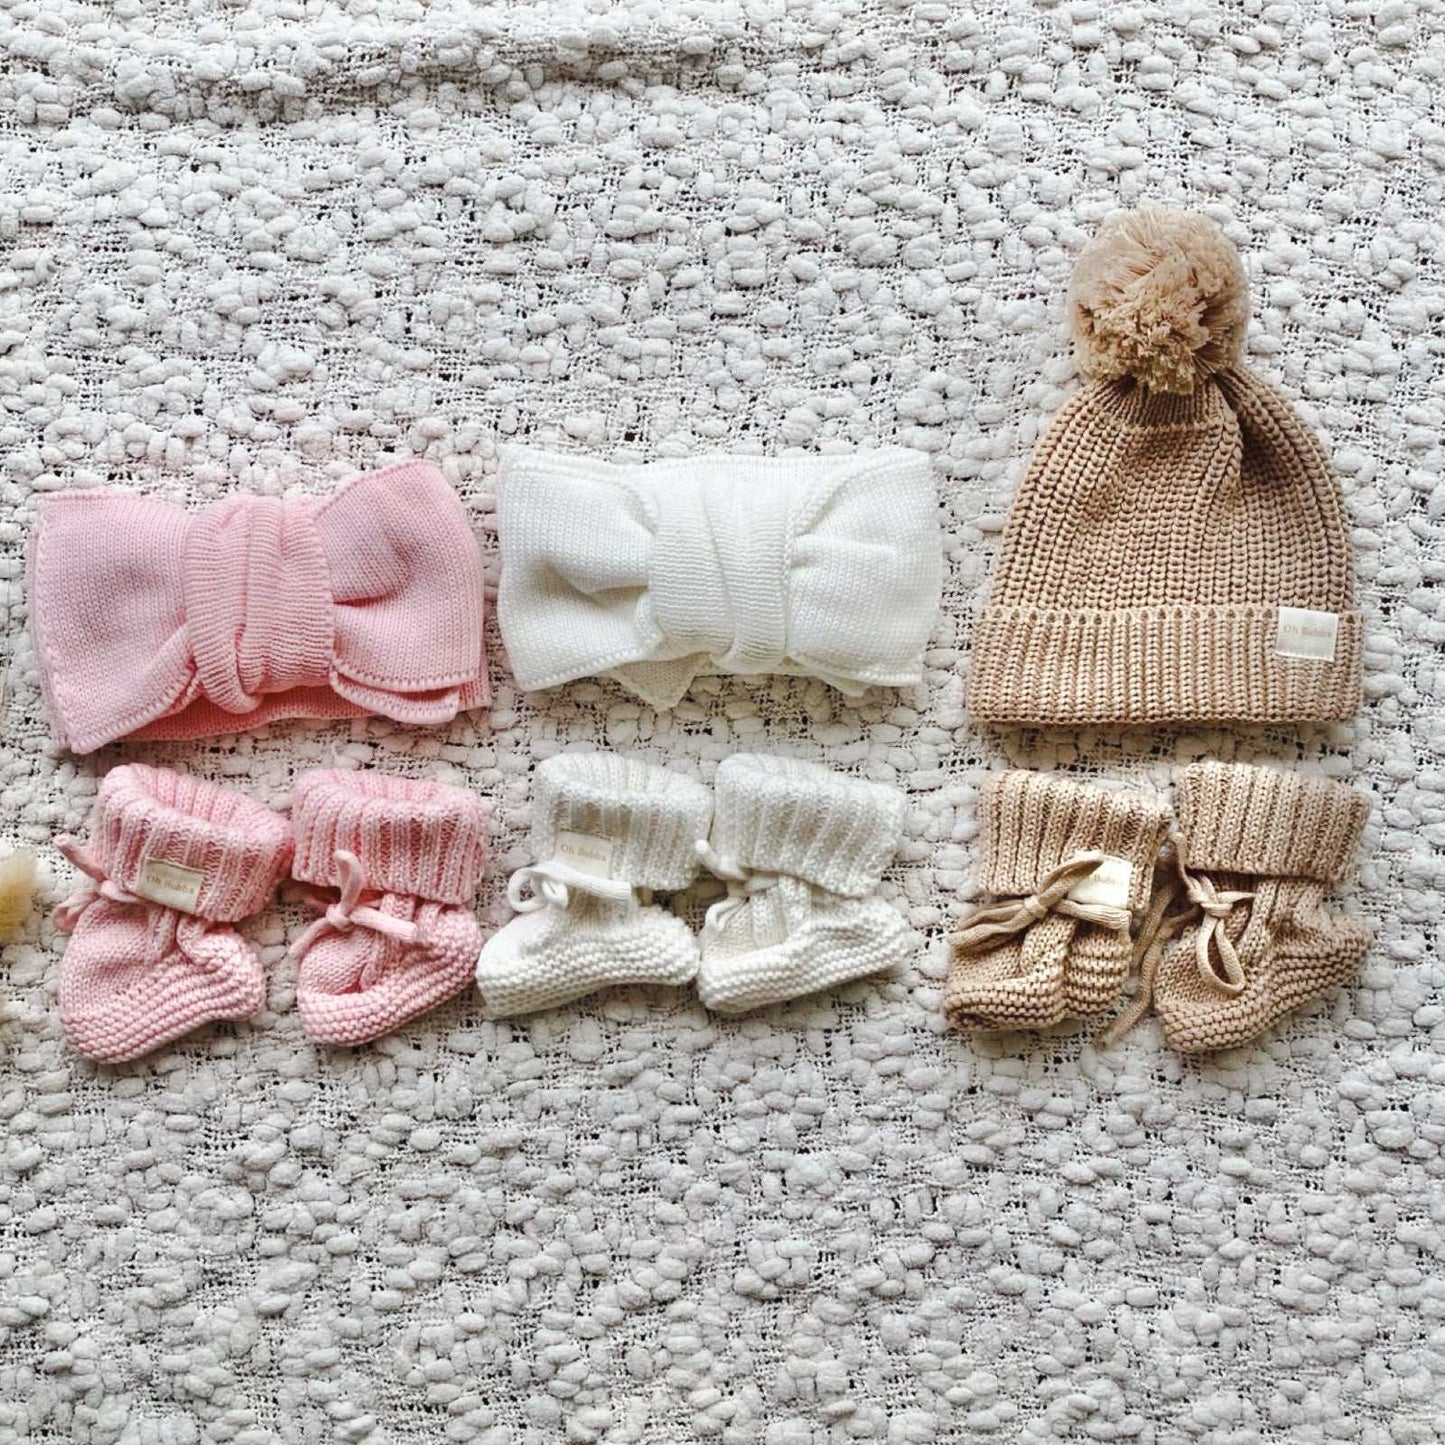 Baby knit booties and headband. Baby knit beanie and booties set. Newborn knit beanie